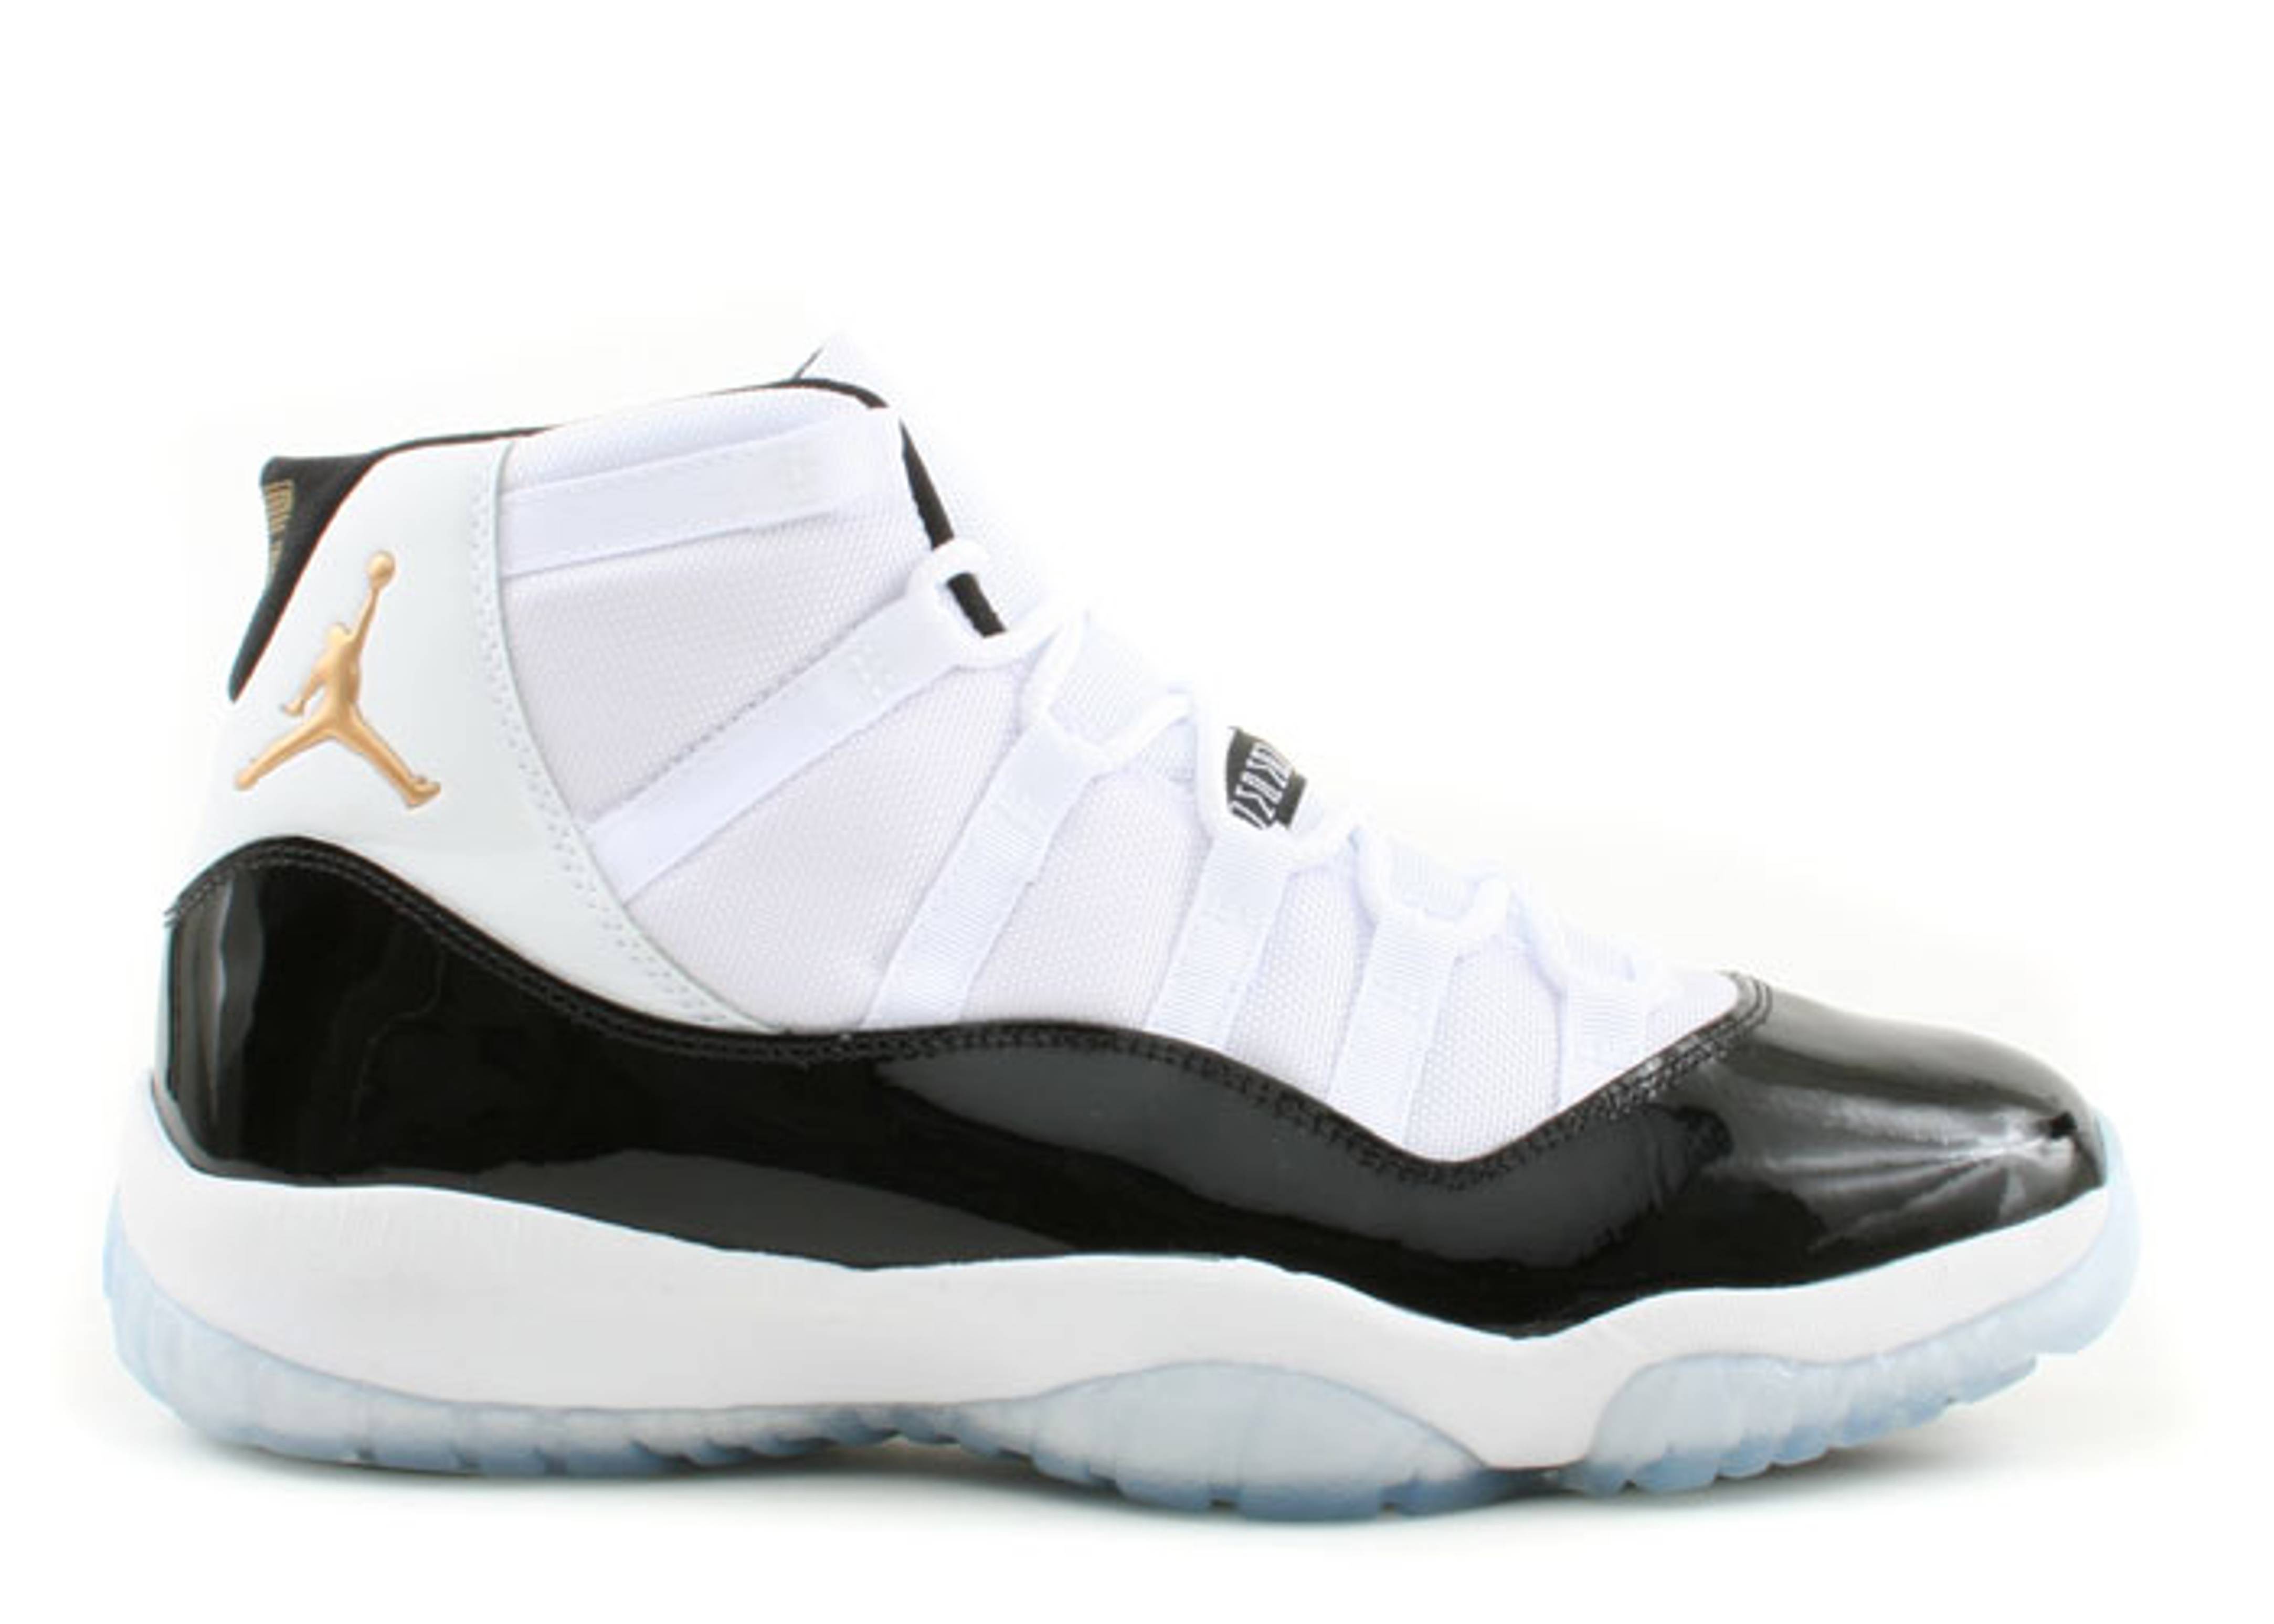 Air Jordan 11 Retro 'Concord - Defining Moments Pack'Color:White,Size:3.5